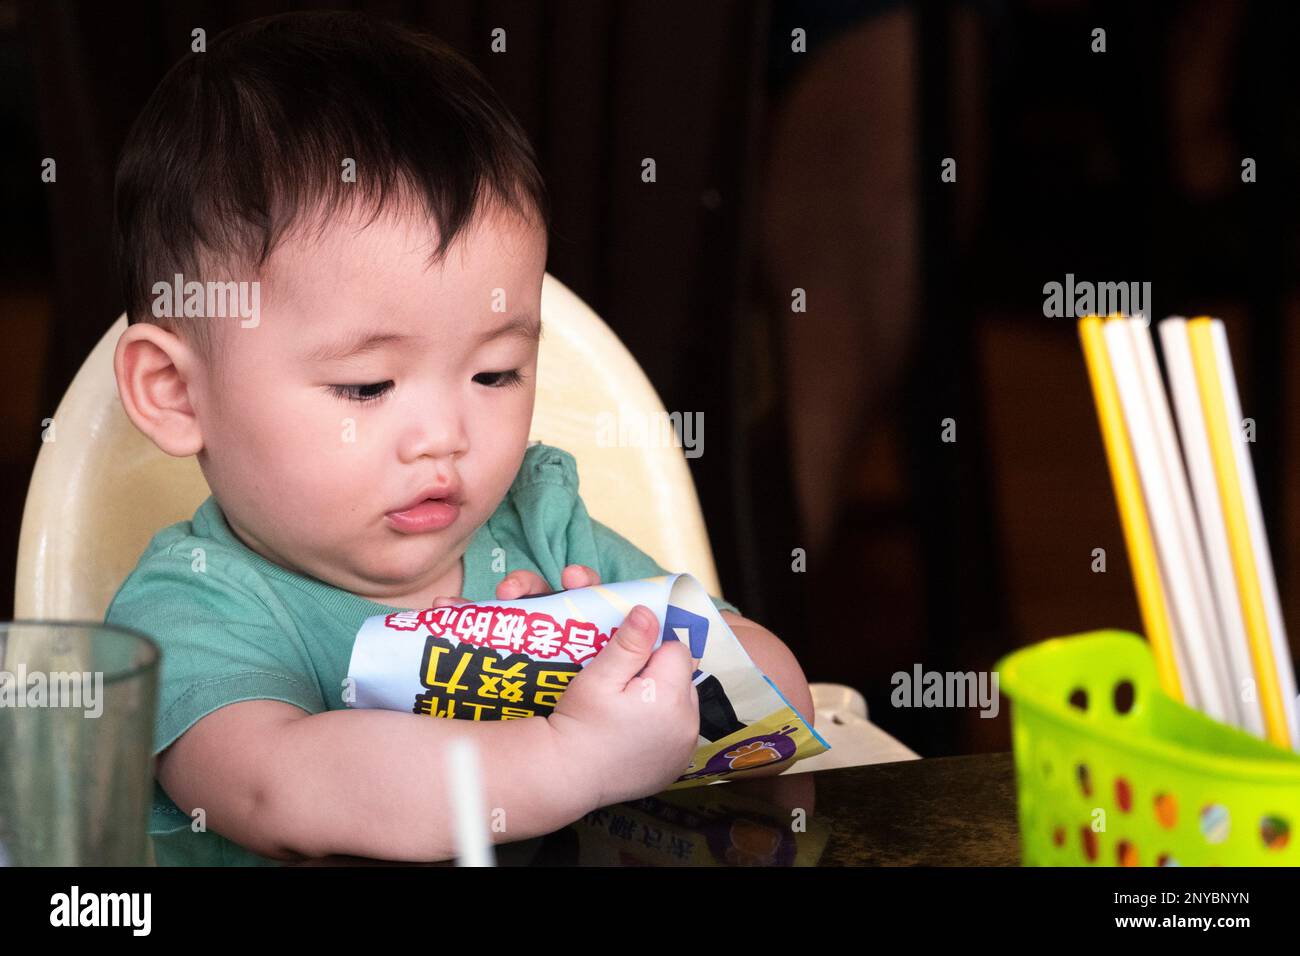 Candid shot of a baby on The 15th Day of Chinese New Year Lunar Year ...